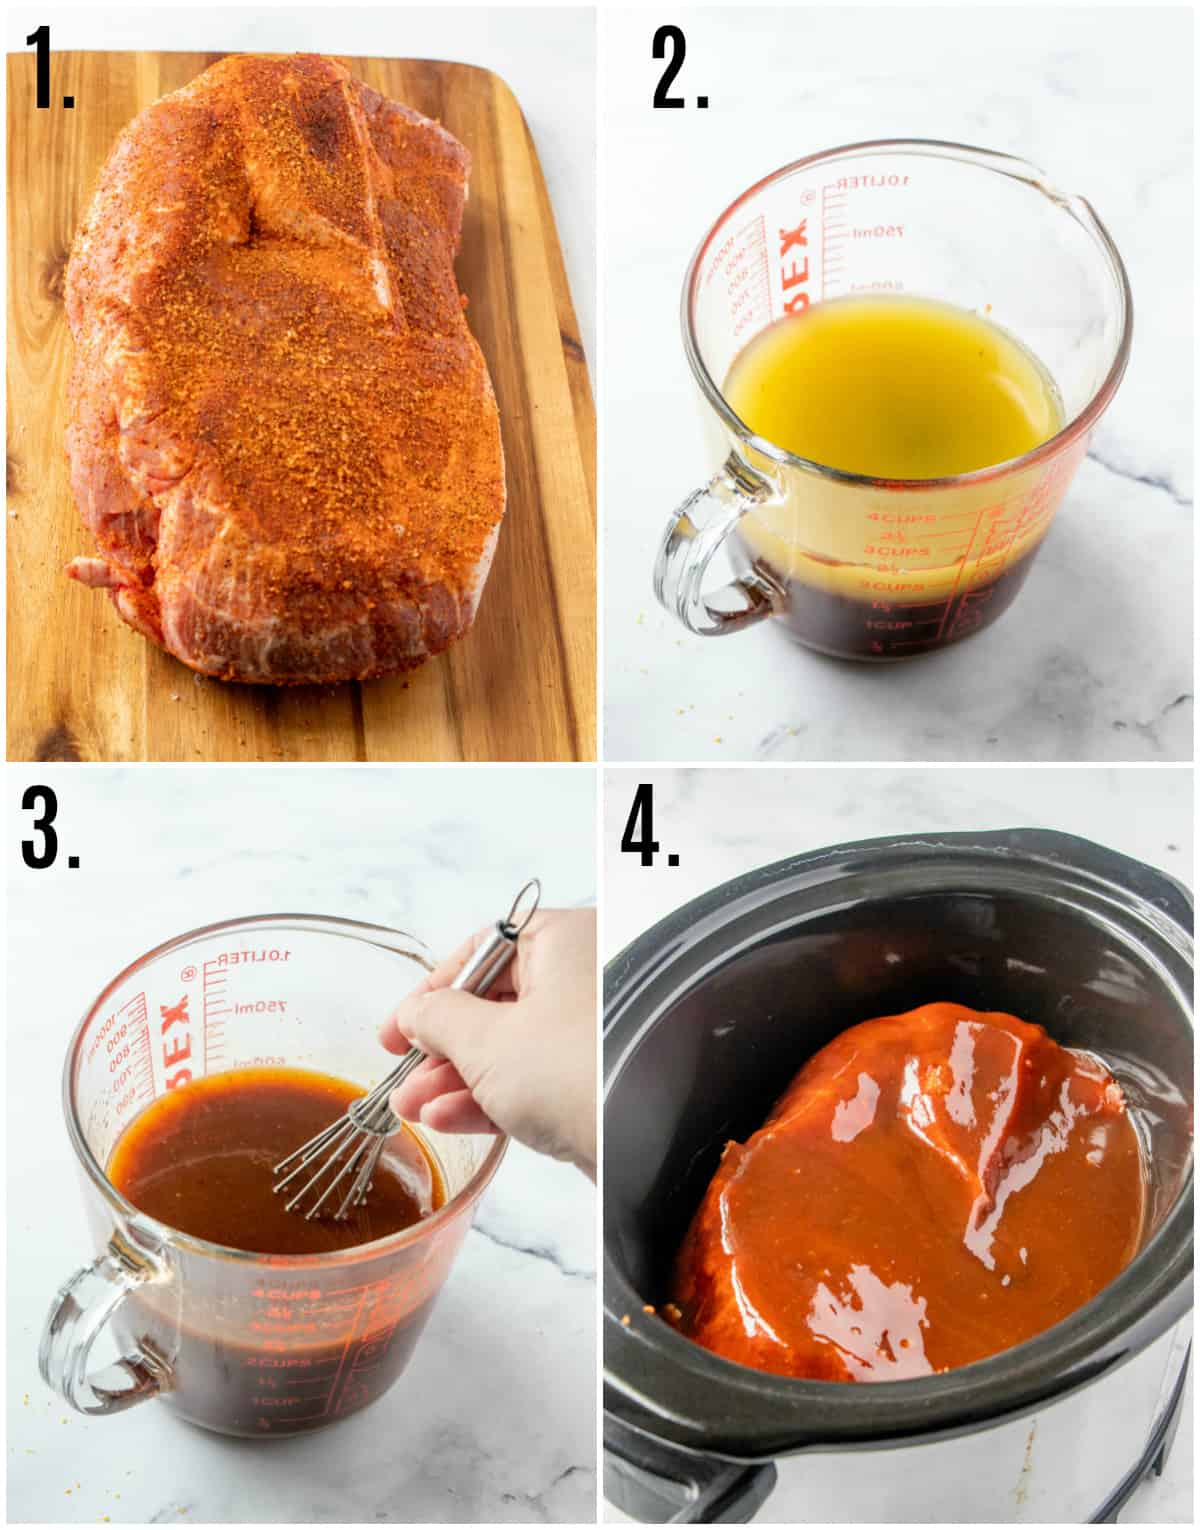 Step by step photos on how to make pulled pork sandwiches